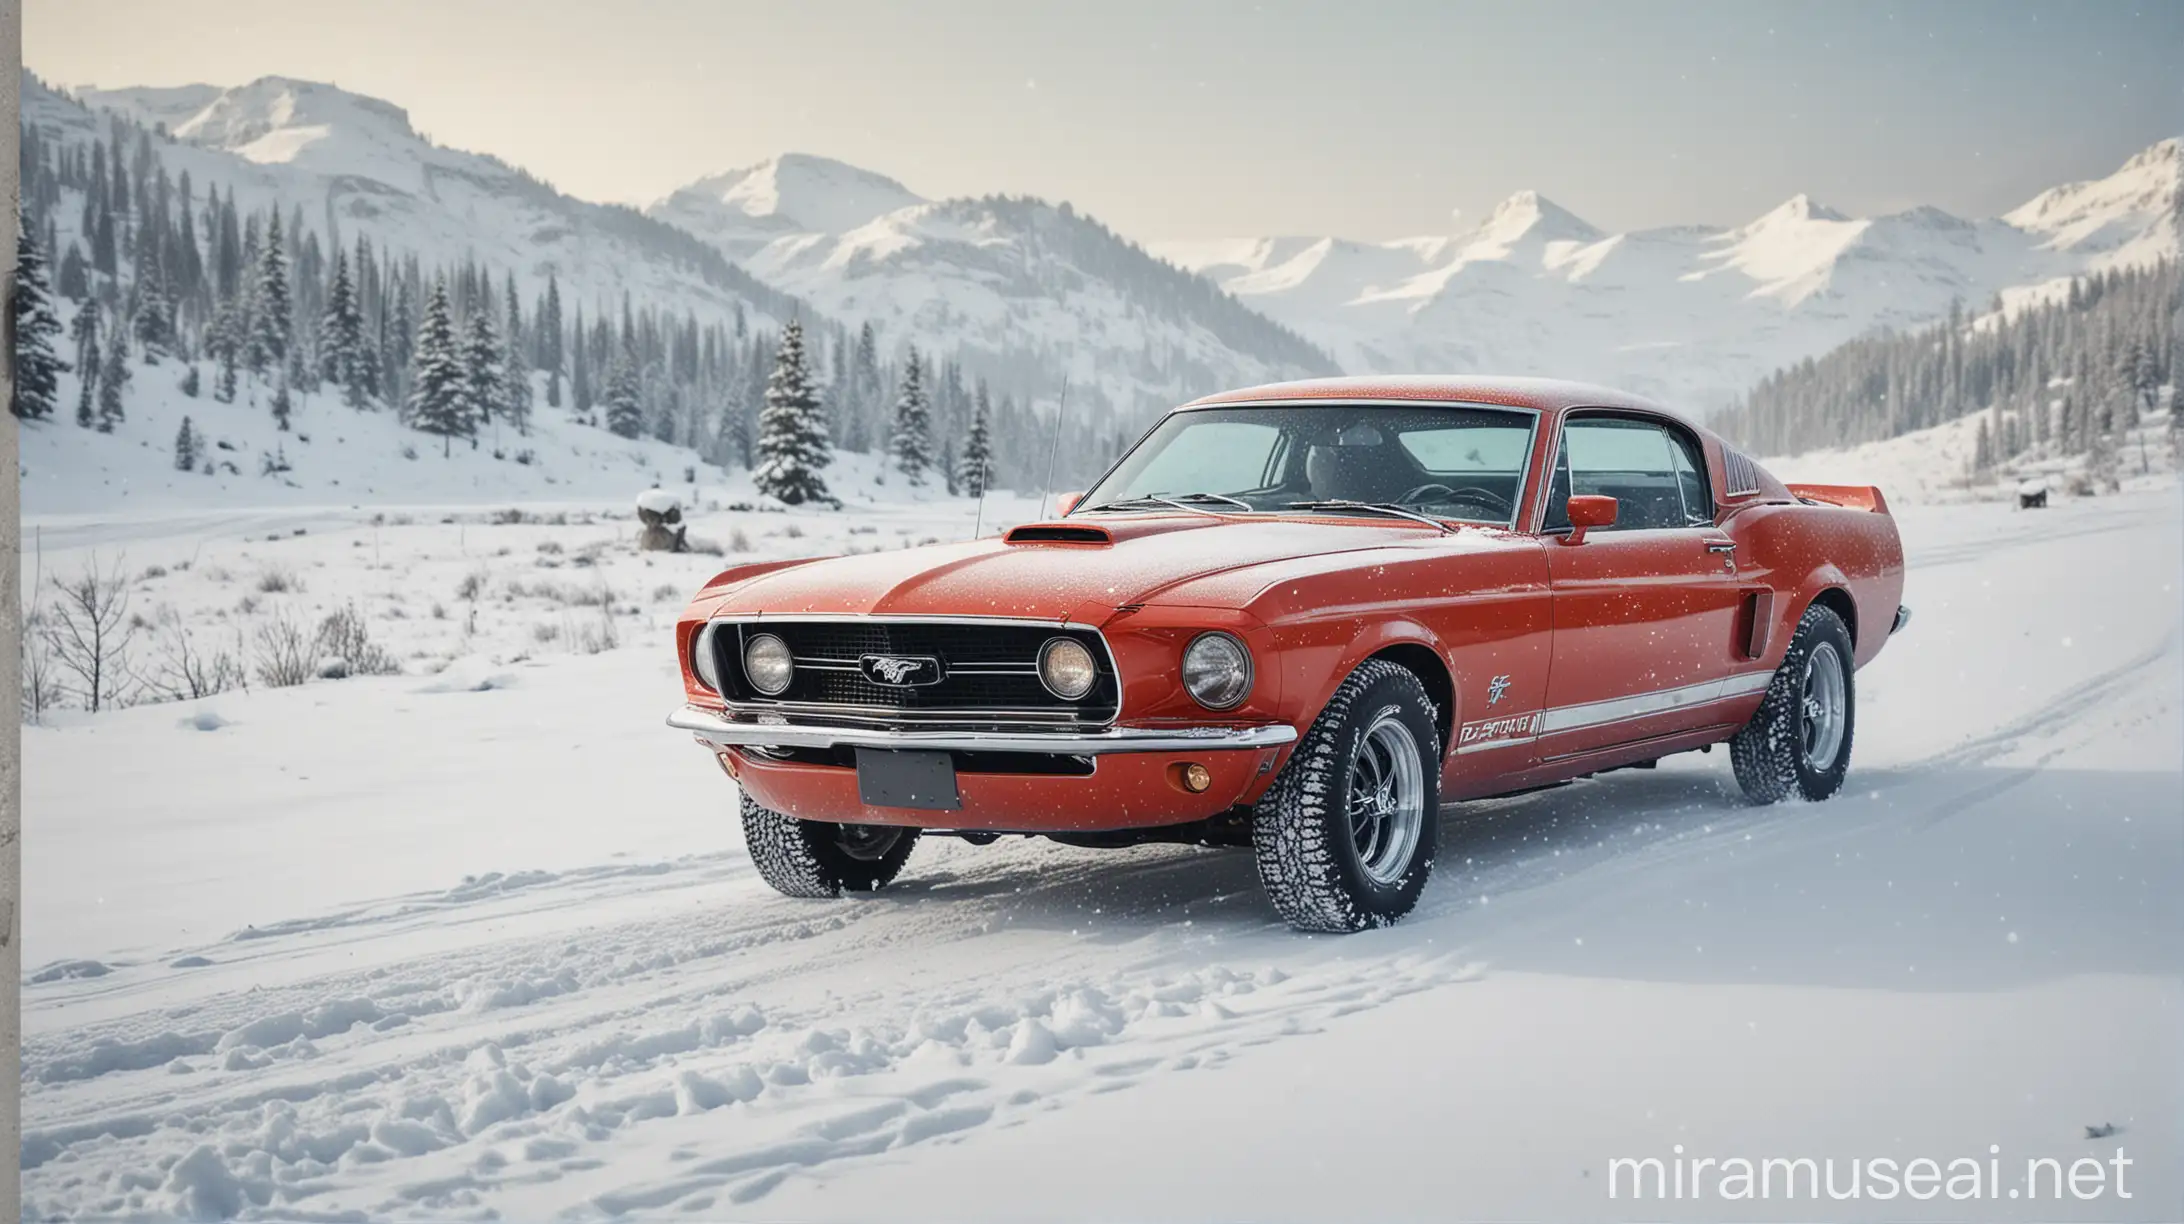 Vintage Ford Mustang 1969 Driving Through Snowy Landscape